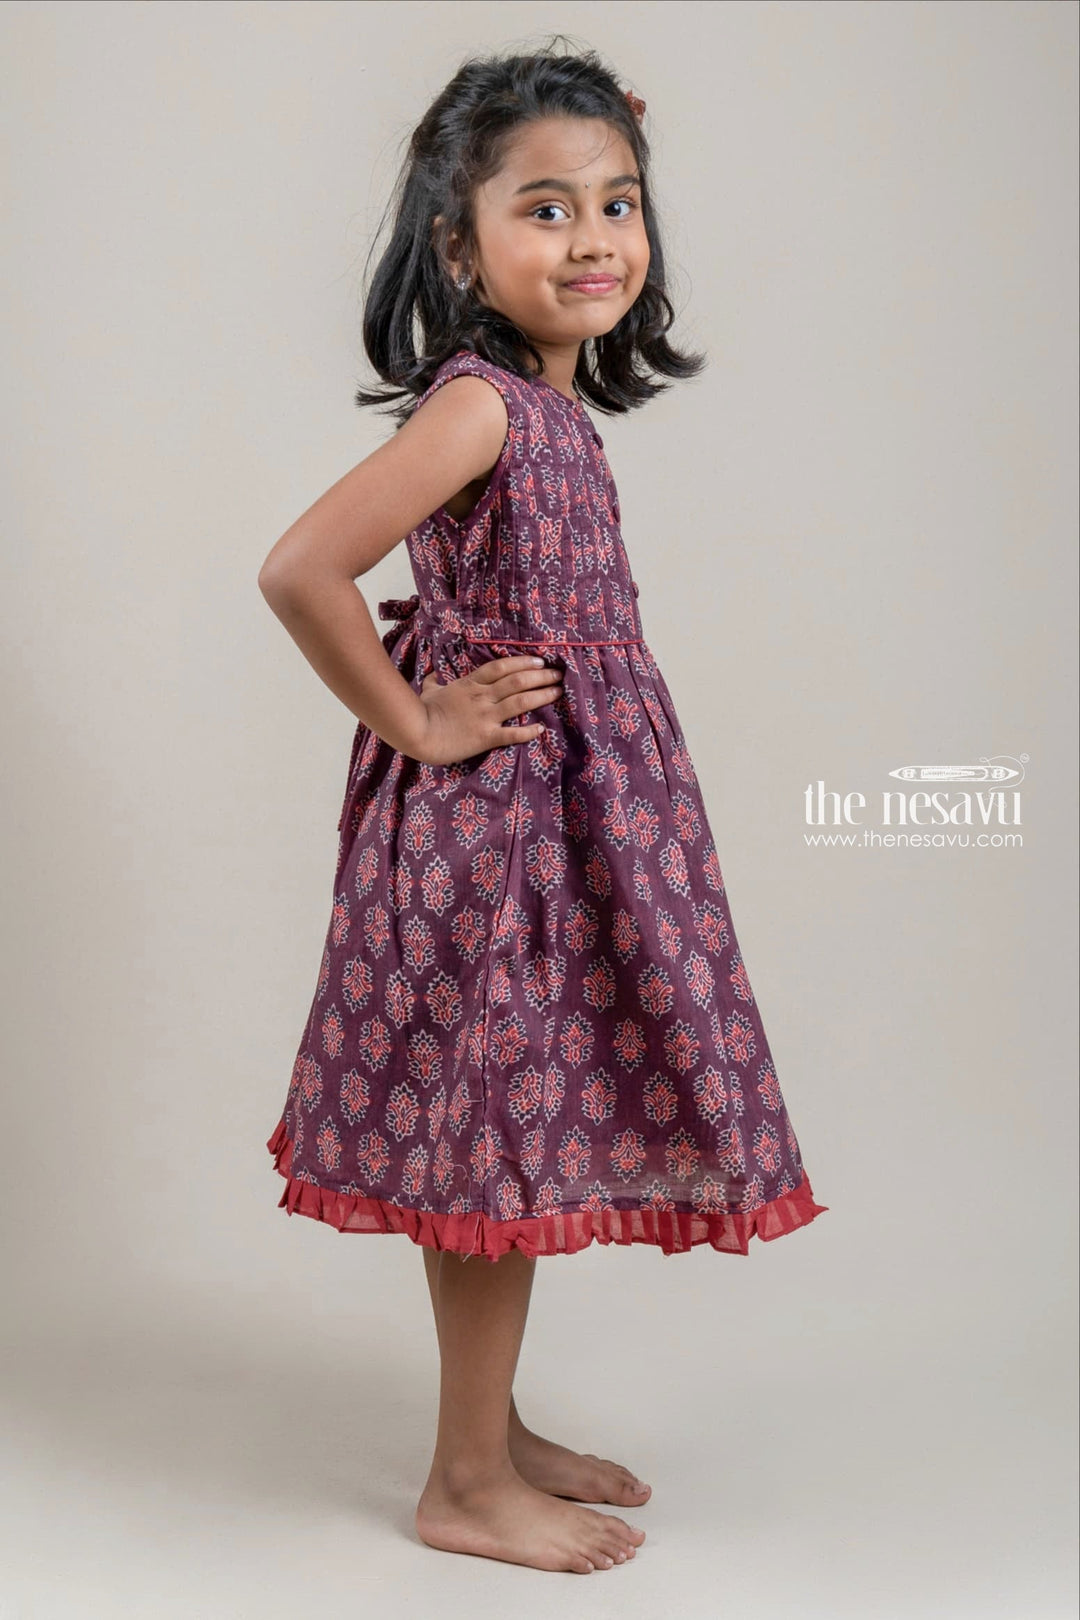 The Nesavu Girls Fancy Frock Adorable Hand Block Printed Sleeveless Brown Cotton Frock for Girls Nesavu Adorable Hand Block Printed Sleeveless Brown Cotton Frock for Girls | Buy Online at The Nesavu